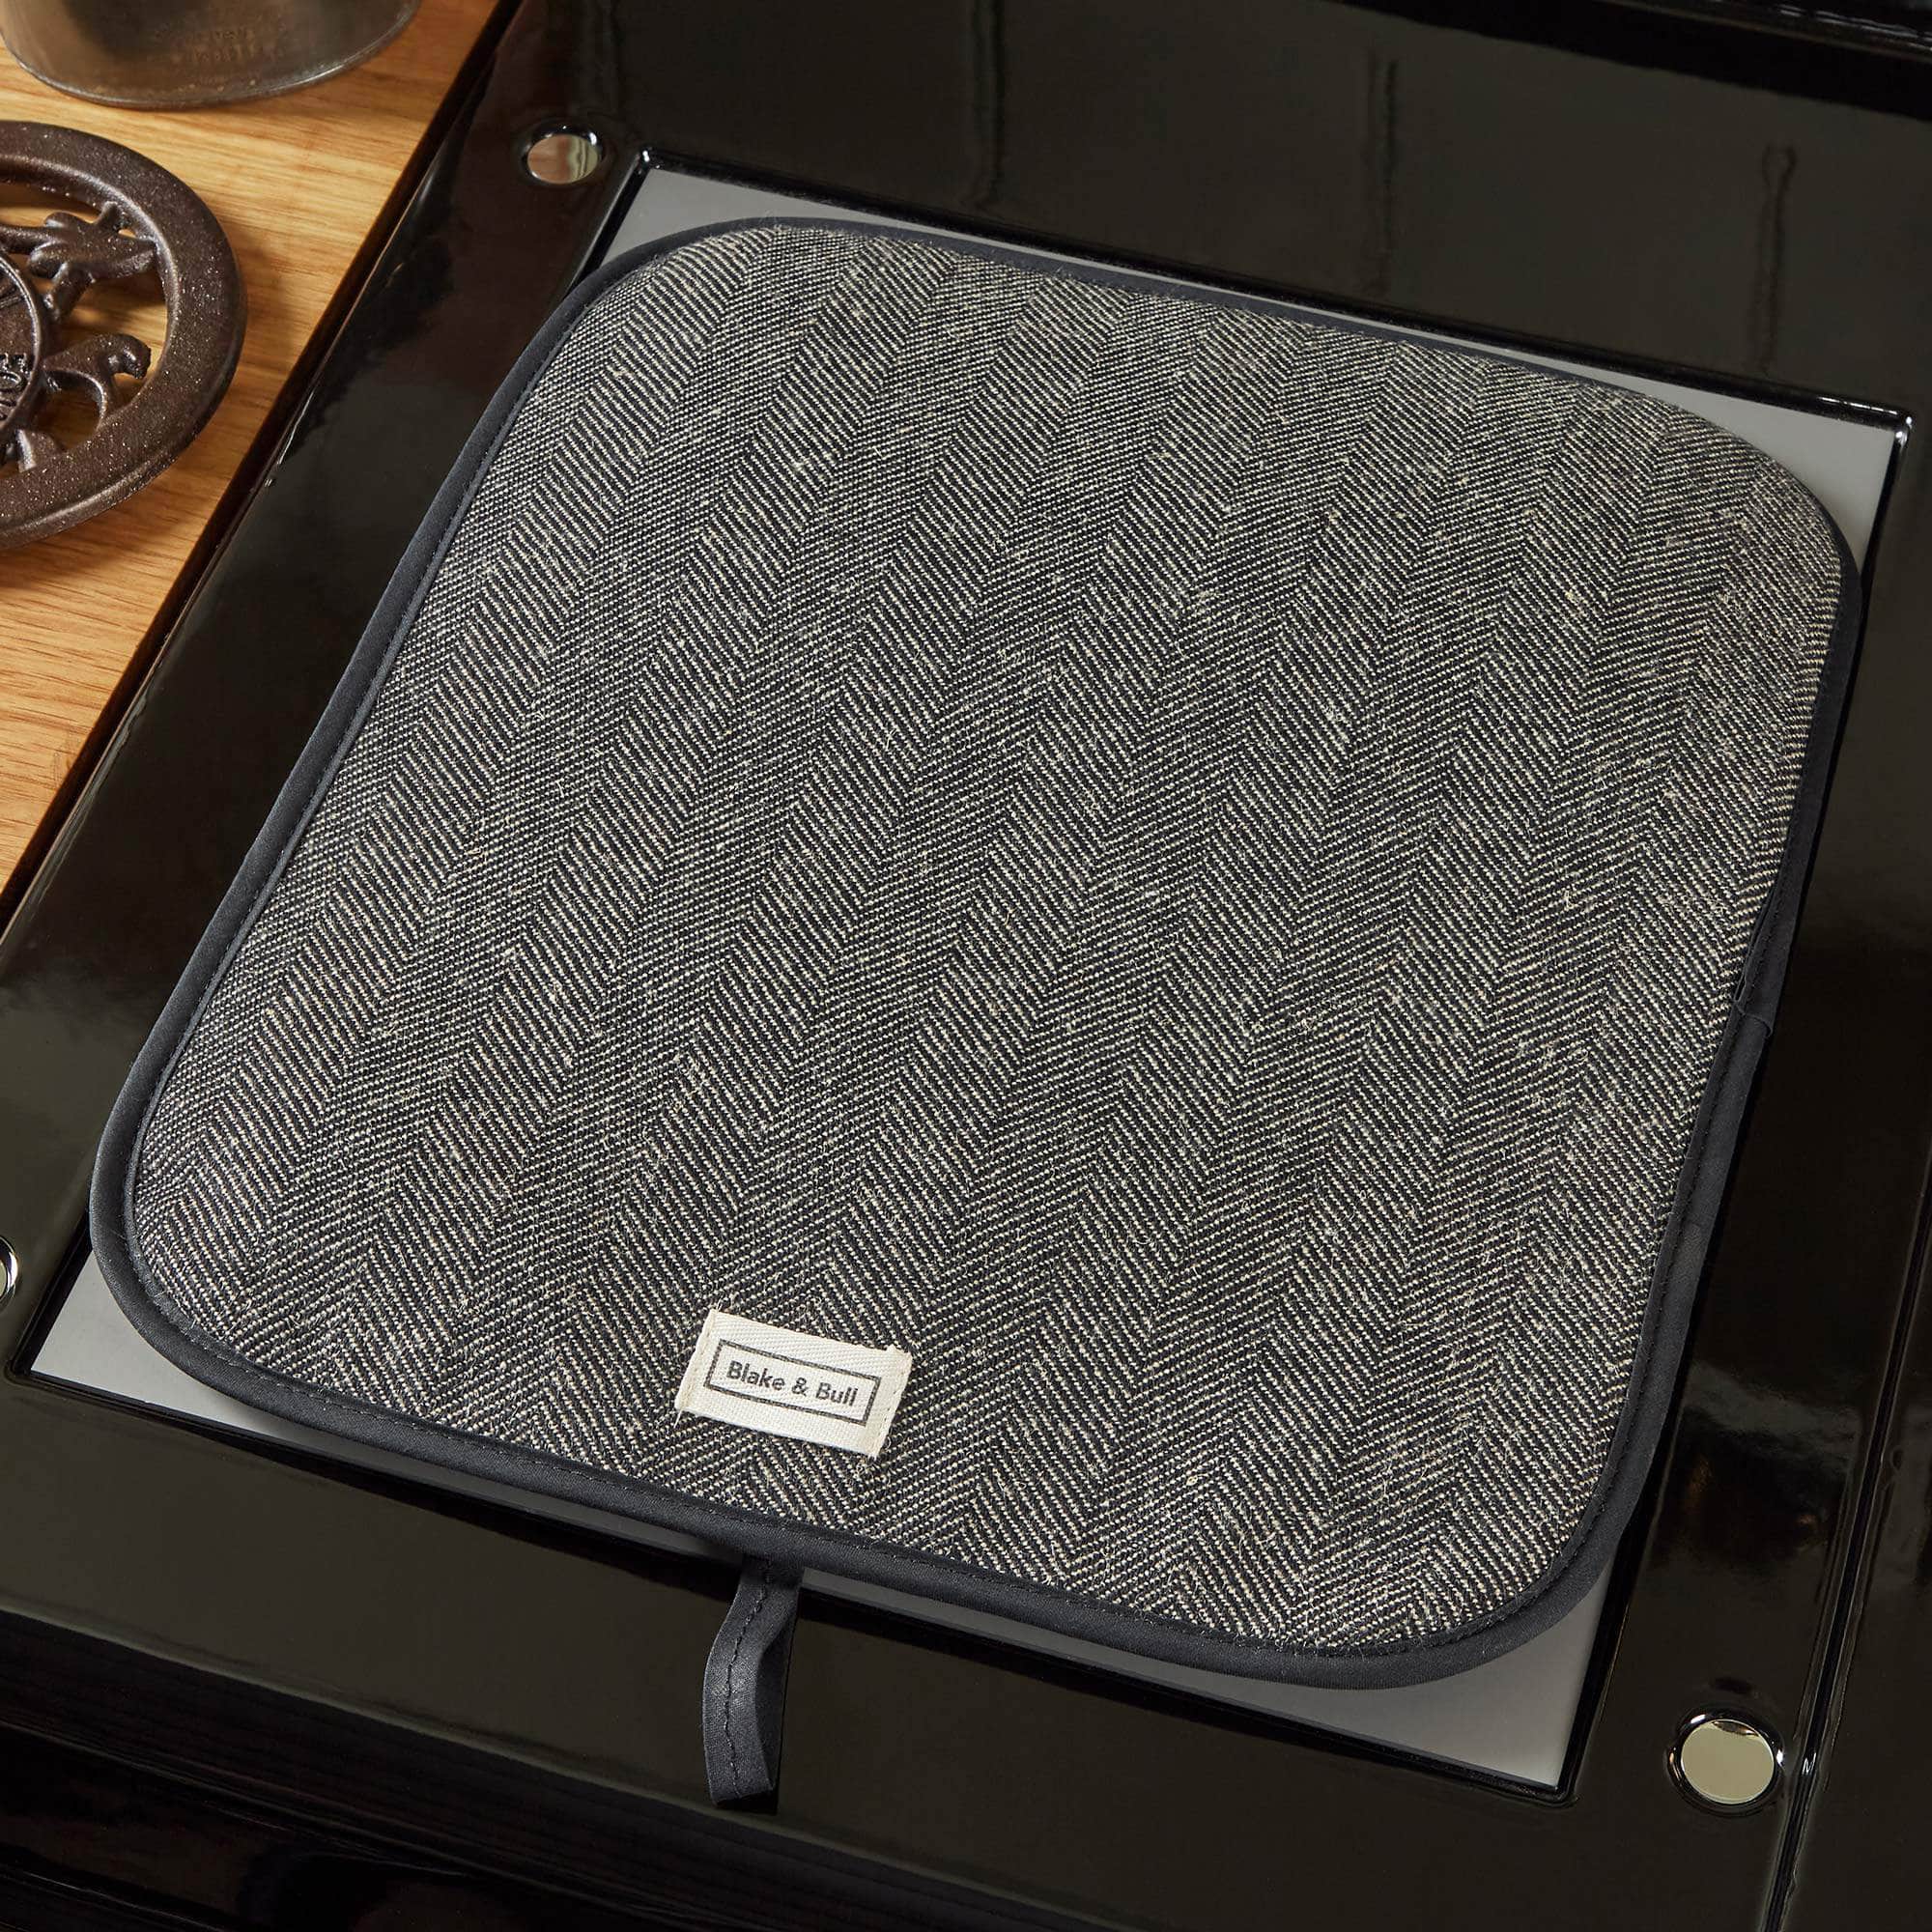 Warming plate cover for use with Aga range cookers - 'Professional!'